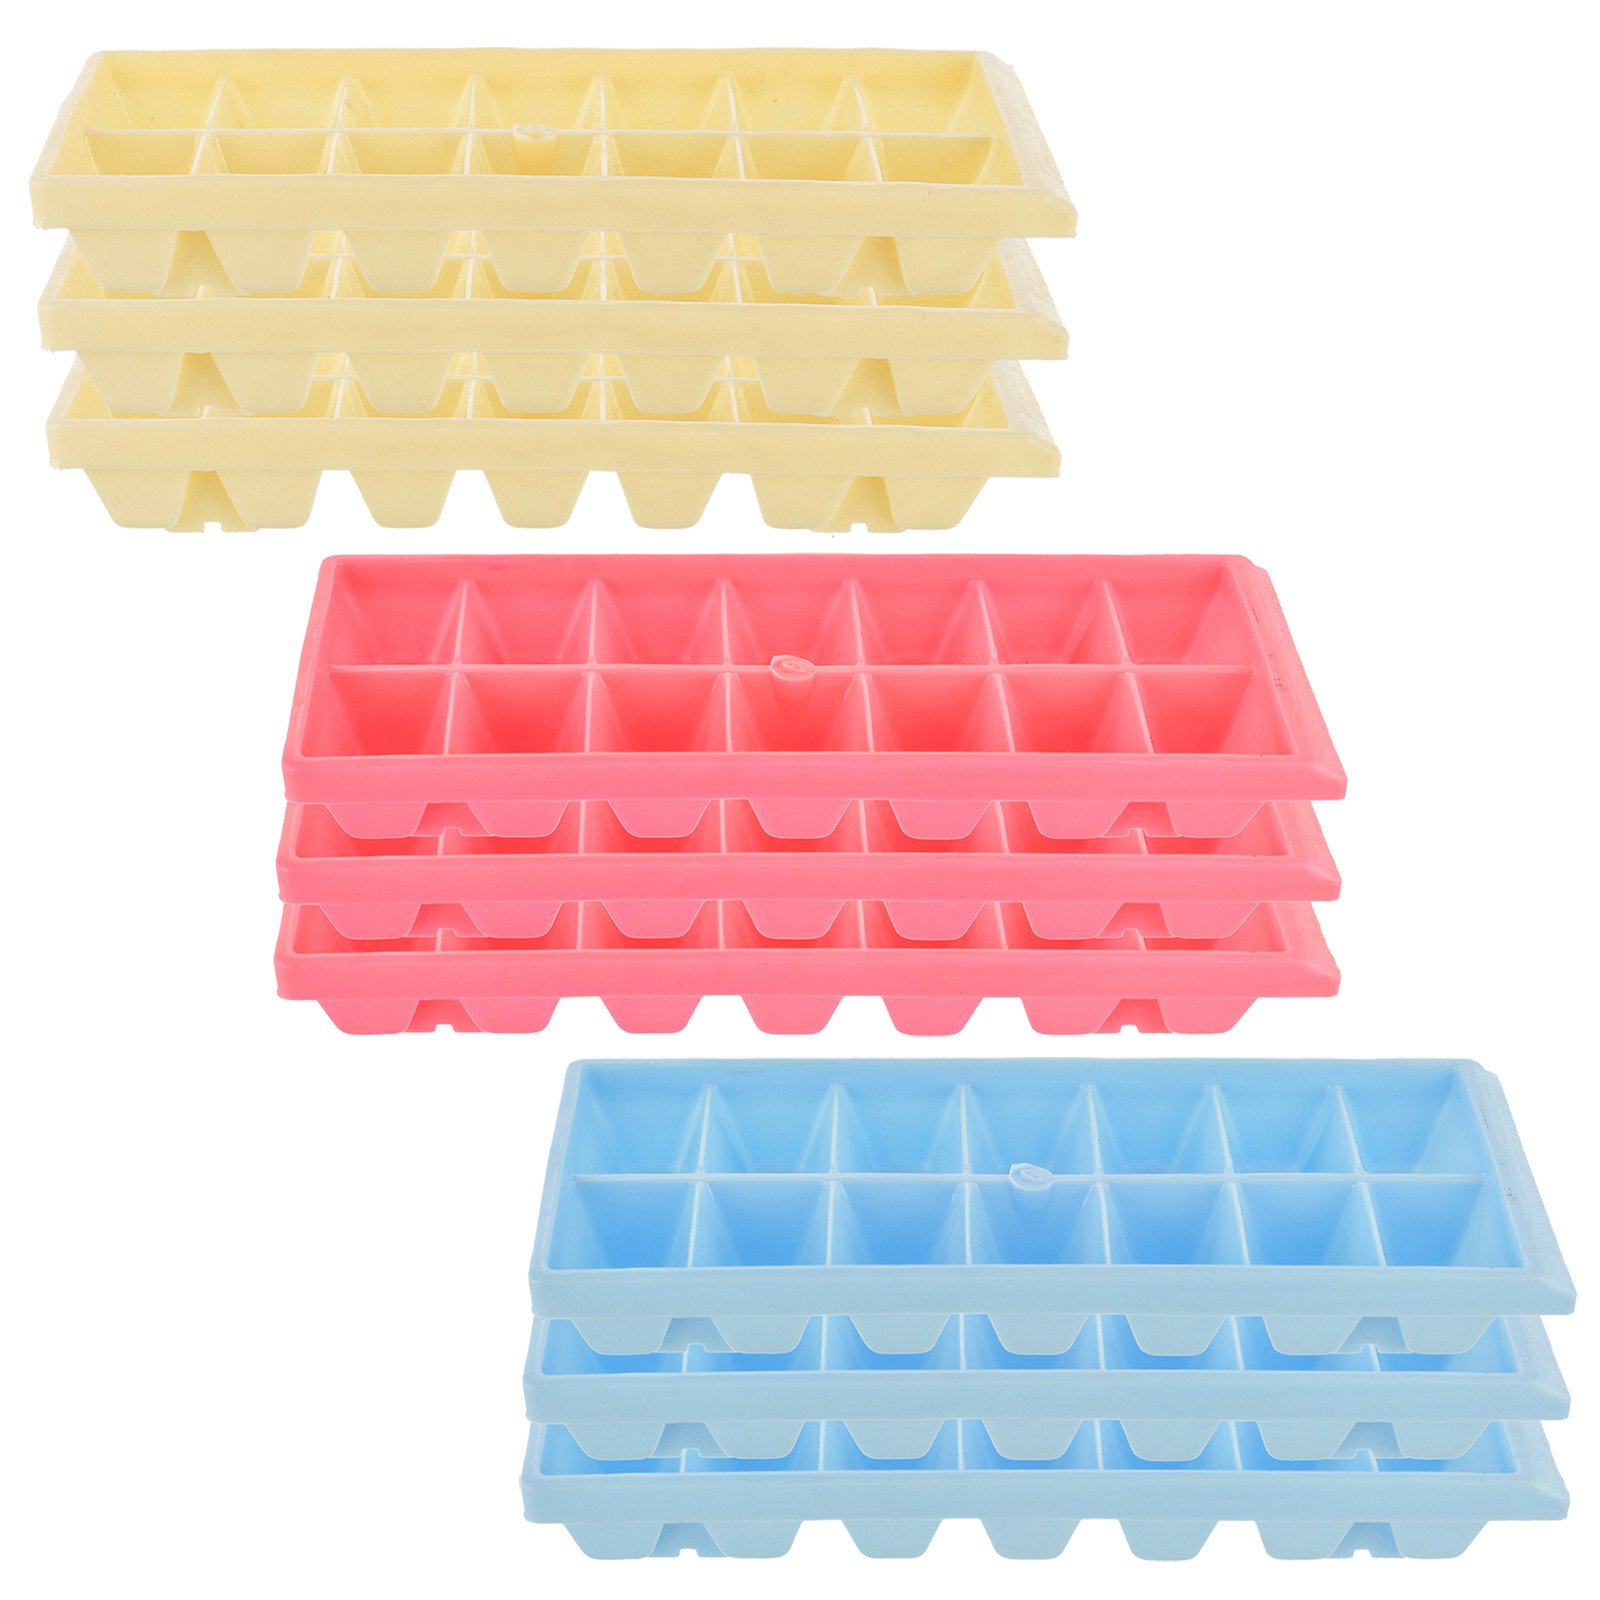 Kuber Industries Plastic Ice Cube Tray Set With 14 Section- Pack of 9 (Cream & Pink & Blue)-HS43KUBMART25803